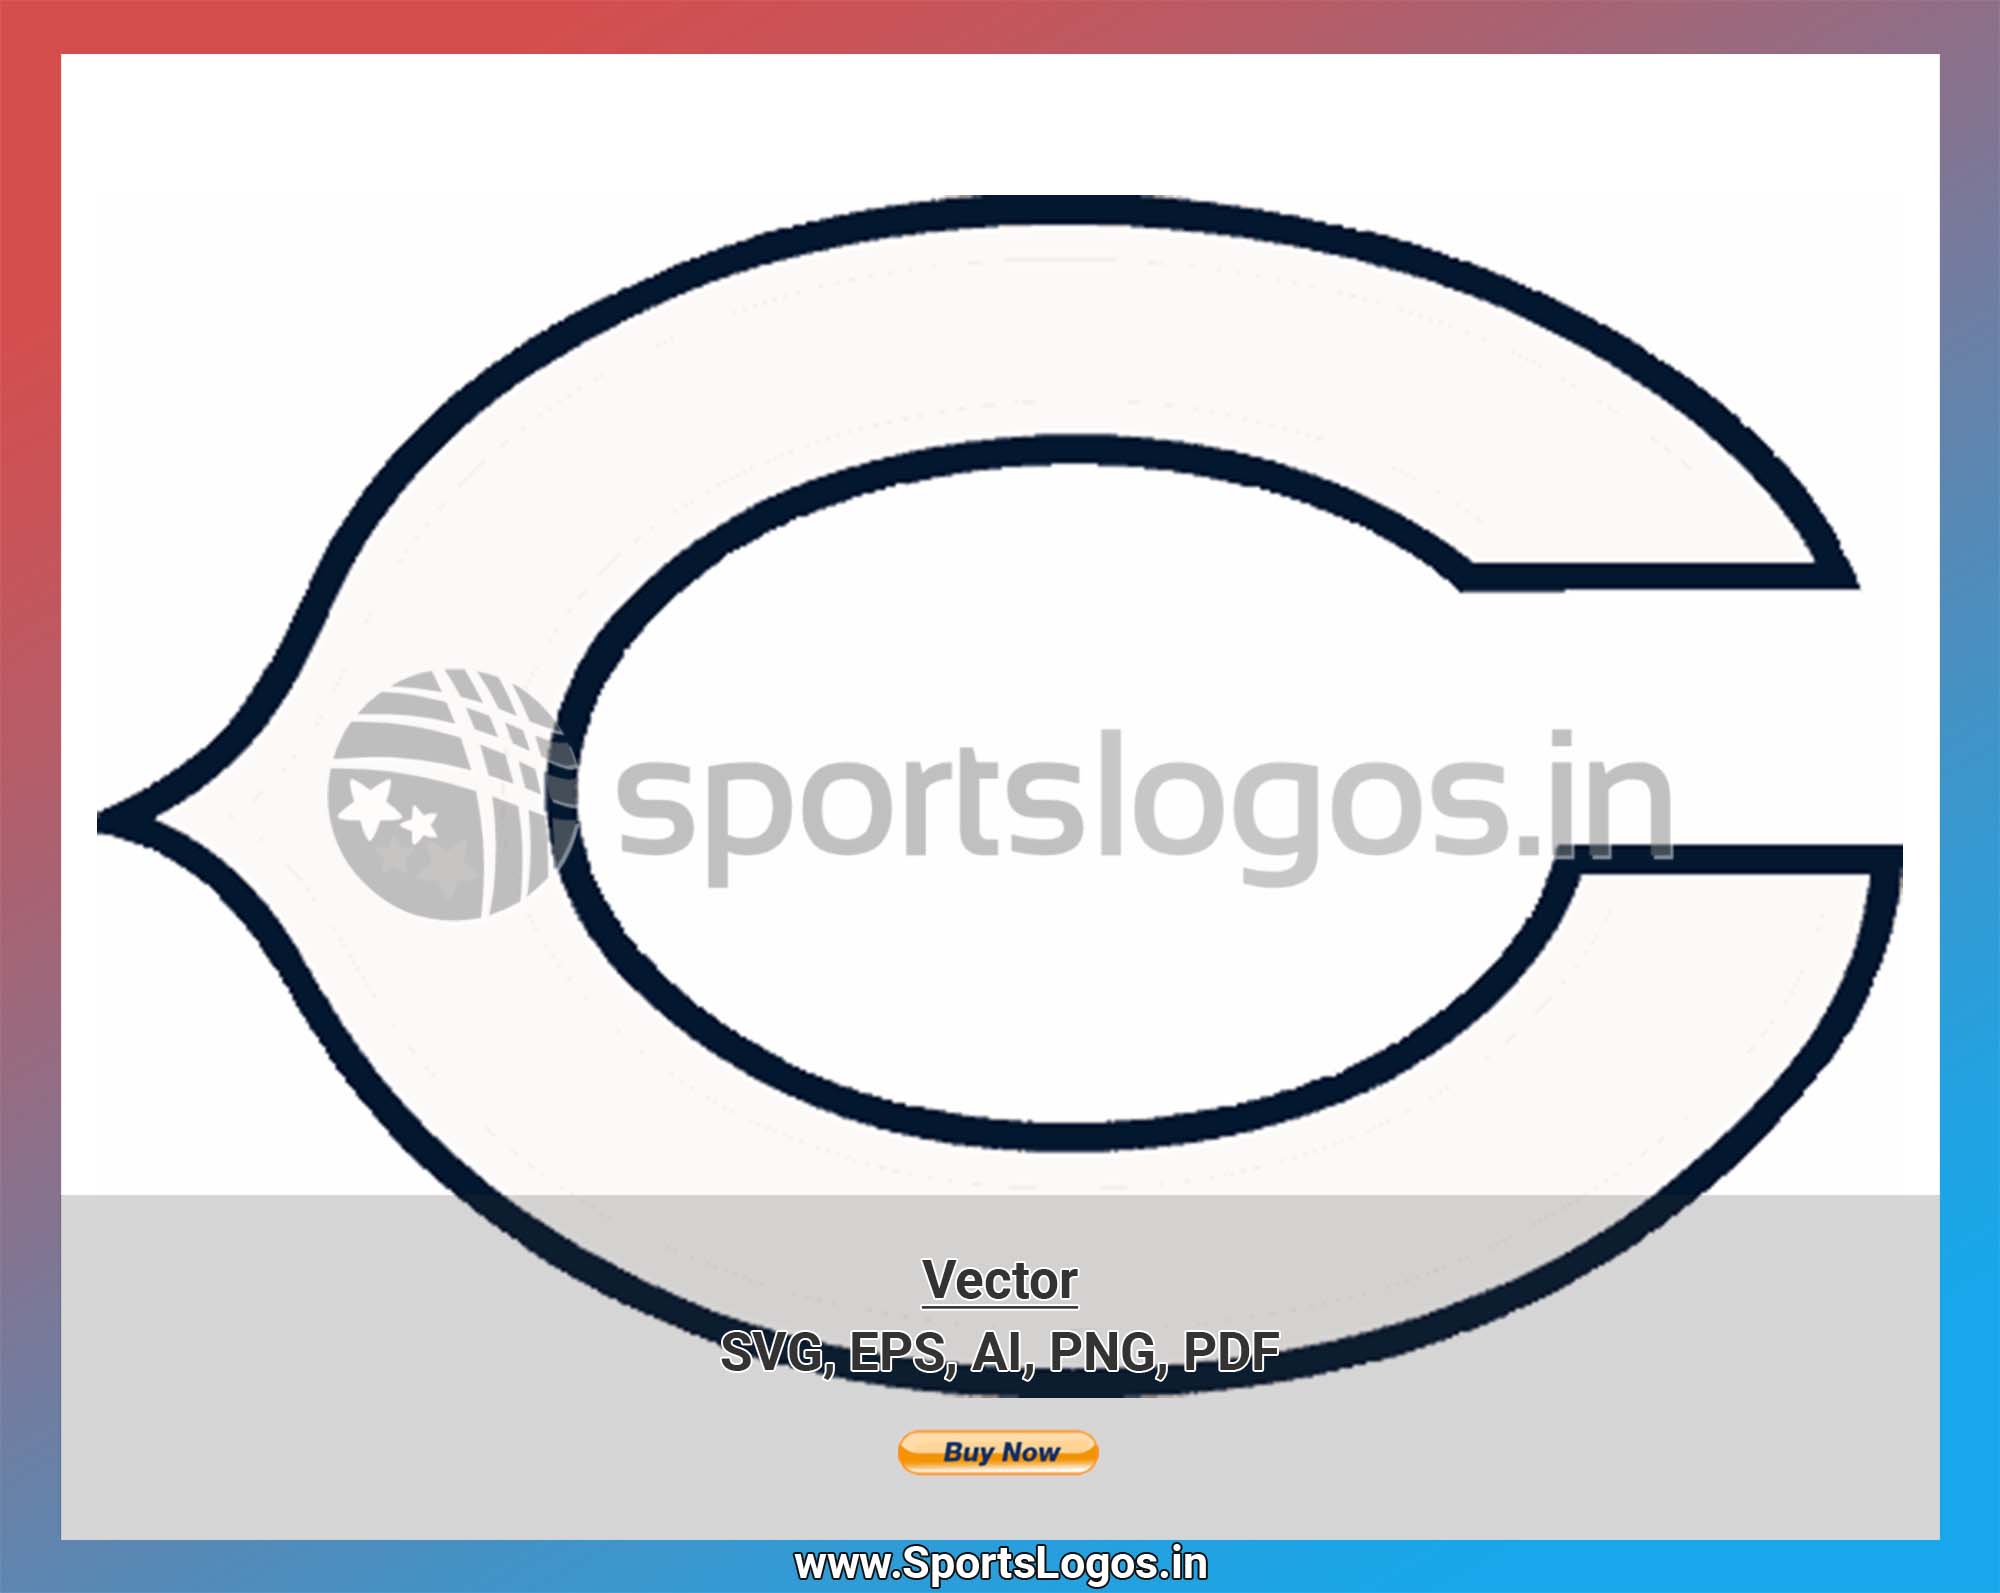 Chicago Bears Logo PNG Vector (AI) Free Download